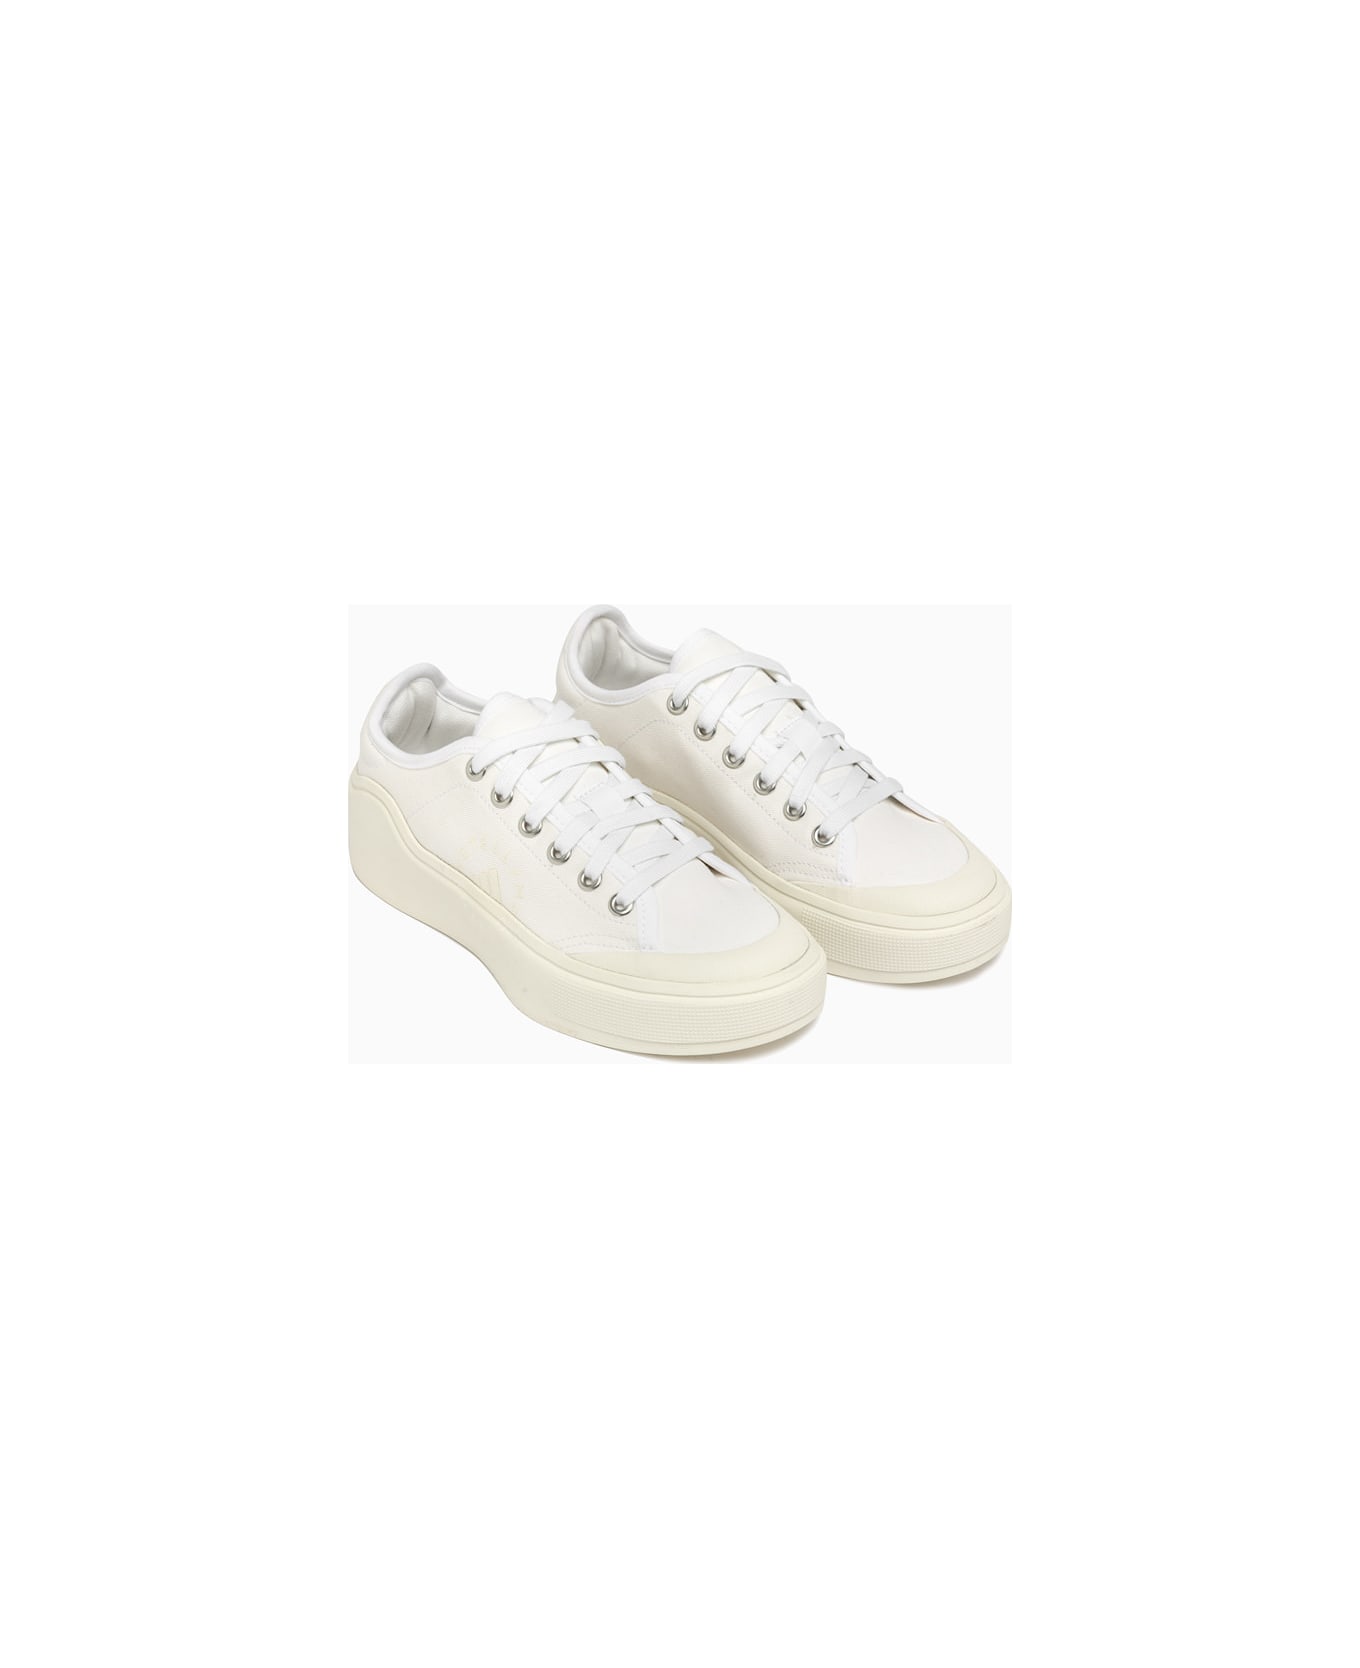 Adidas by Stella McCartney Court Cotton Sneakers Hq8675 スニーカー